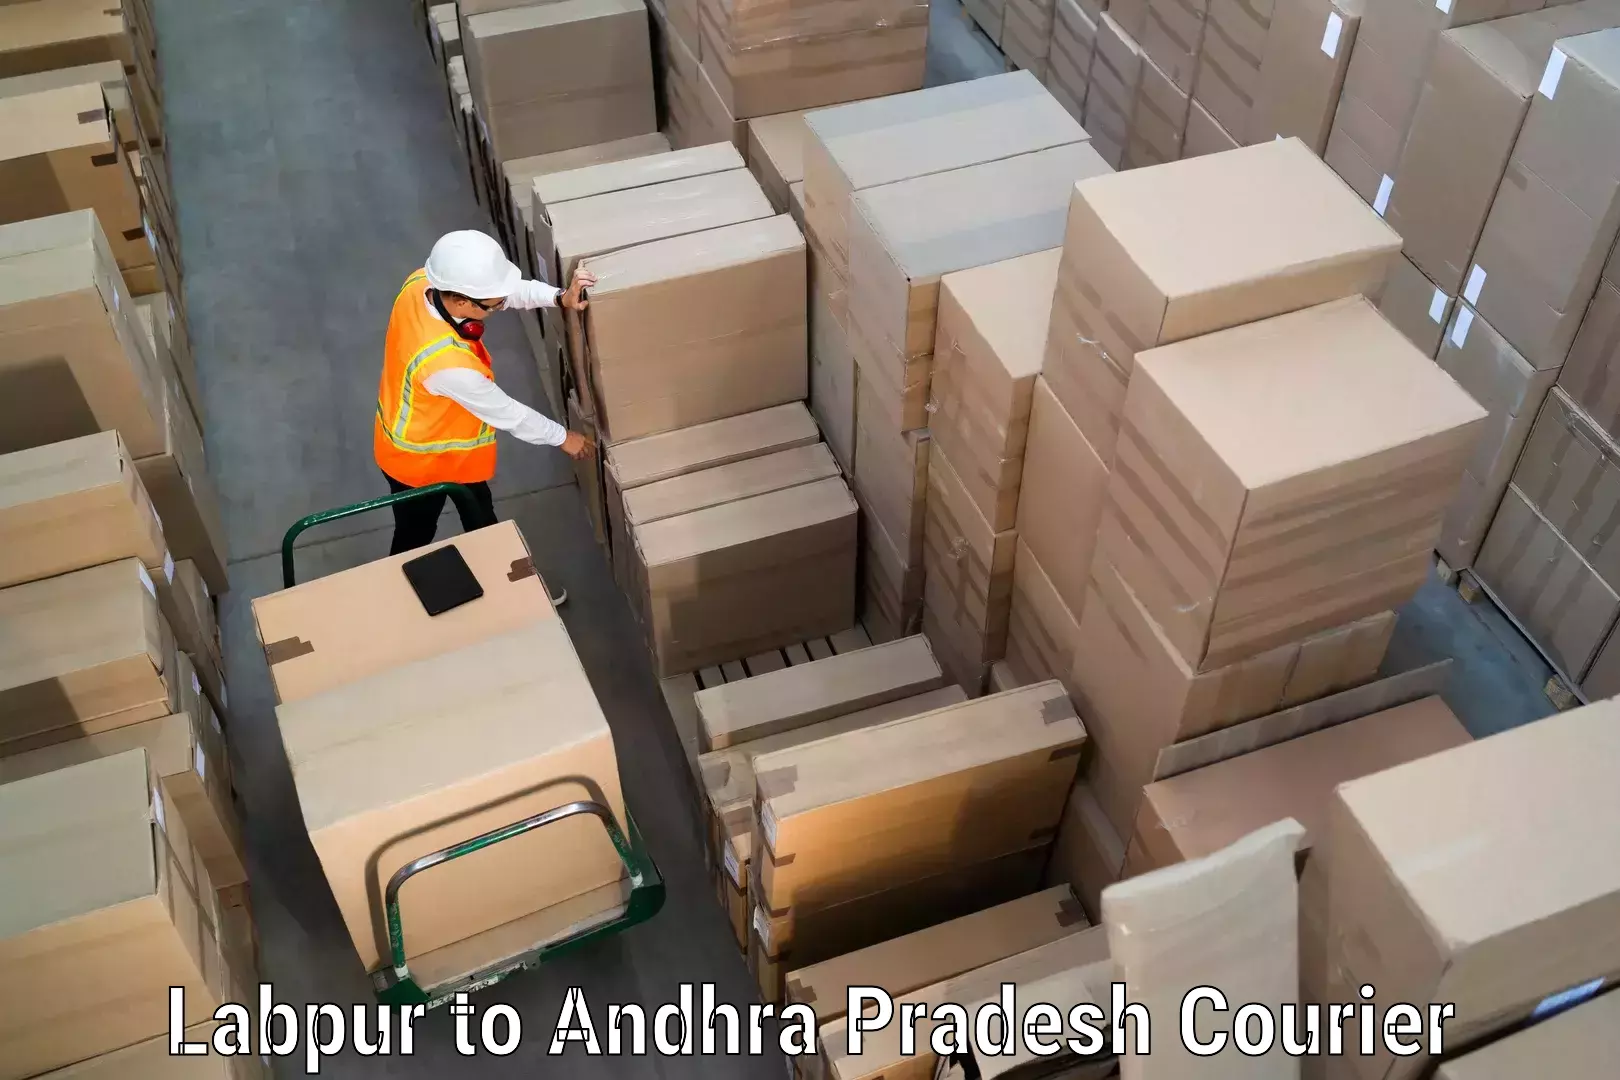 Return courier service Labpur to Giddalur